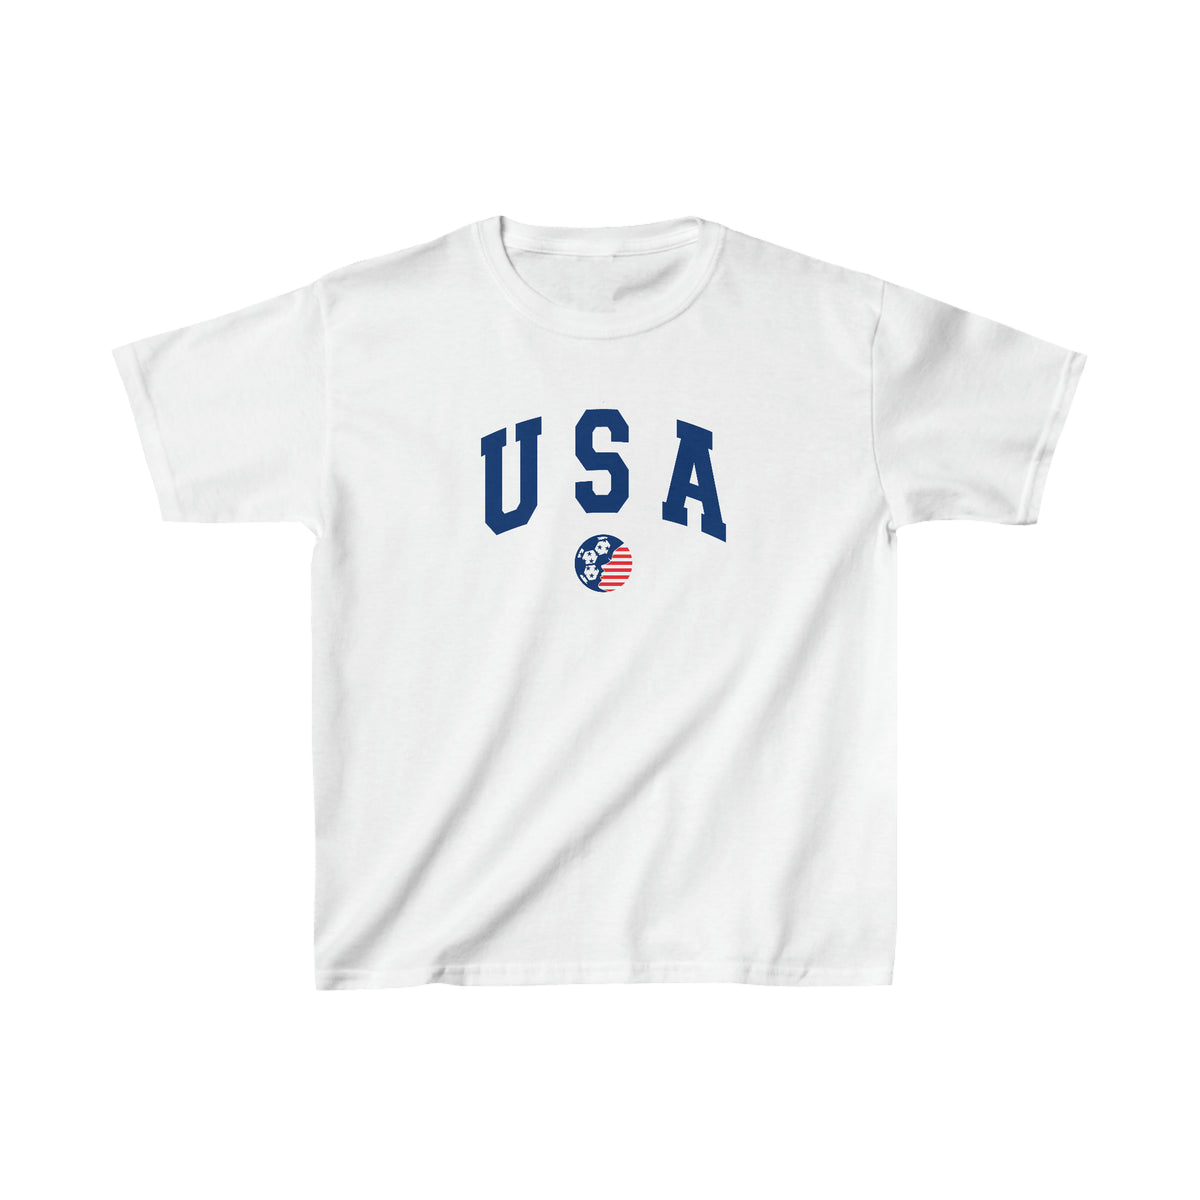 USA Support Women's Soccer YOUTH T-Shirt